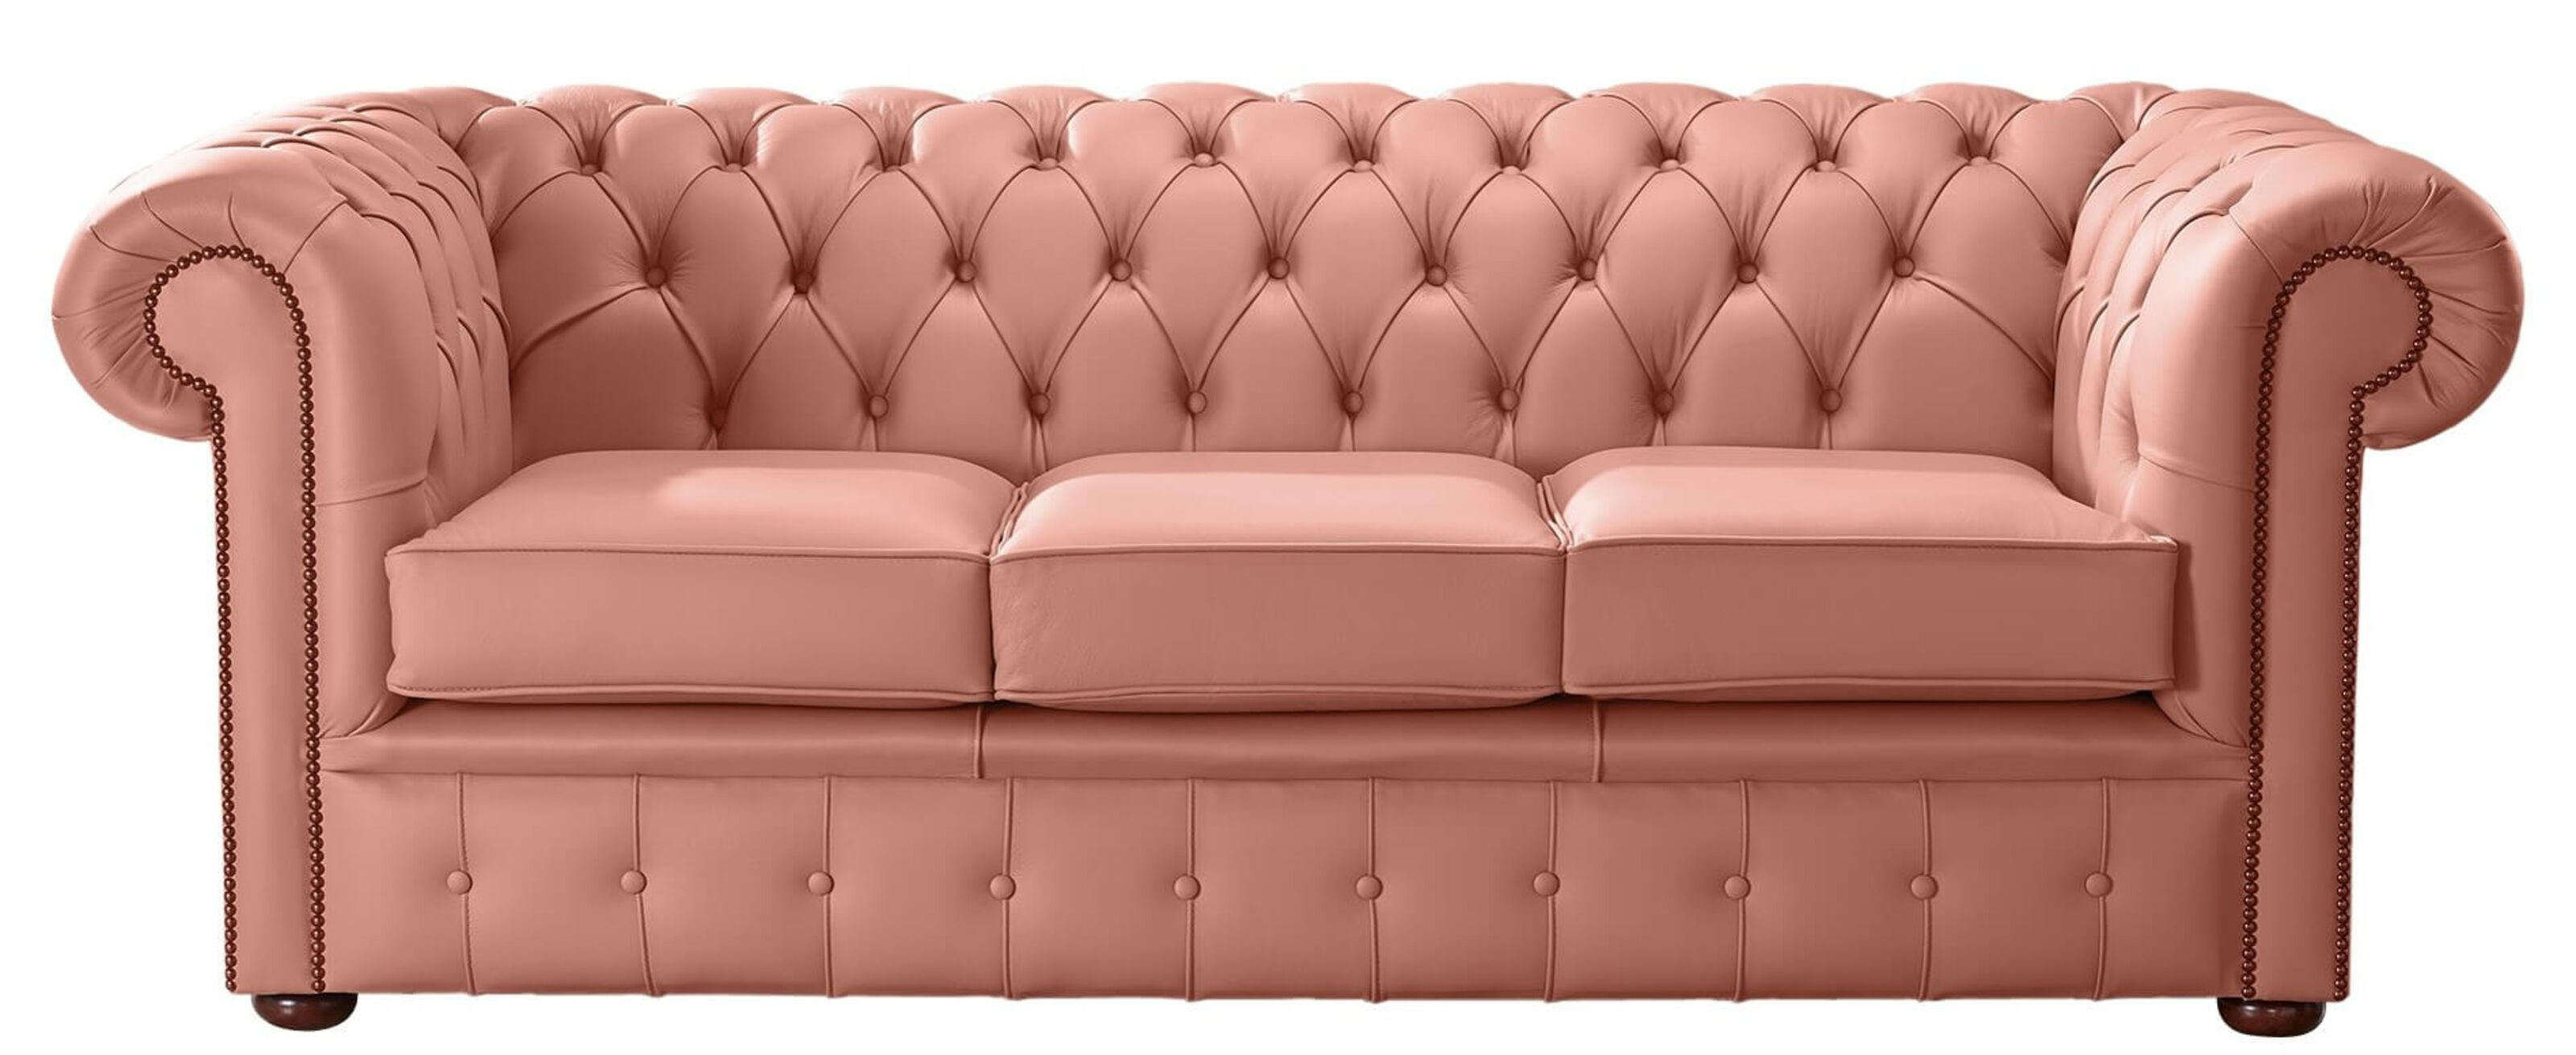 Chesterfield Sofas: Adding That Special Touch to Your Home  %Post Title